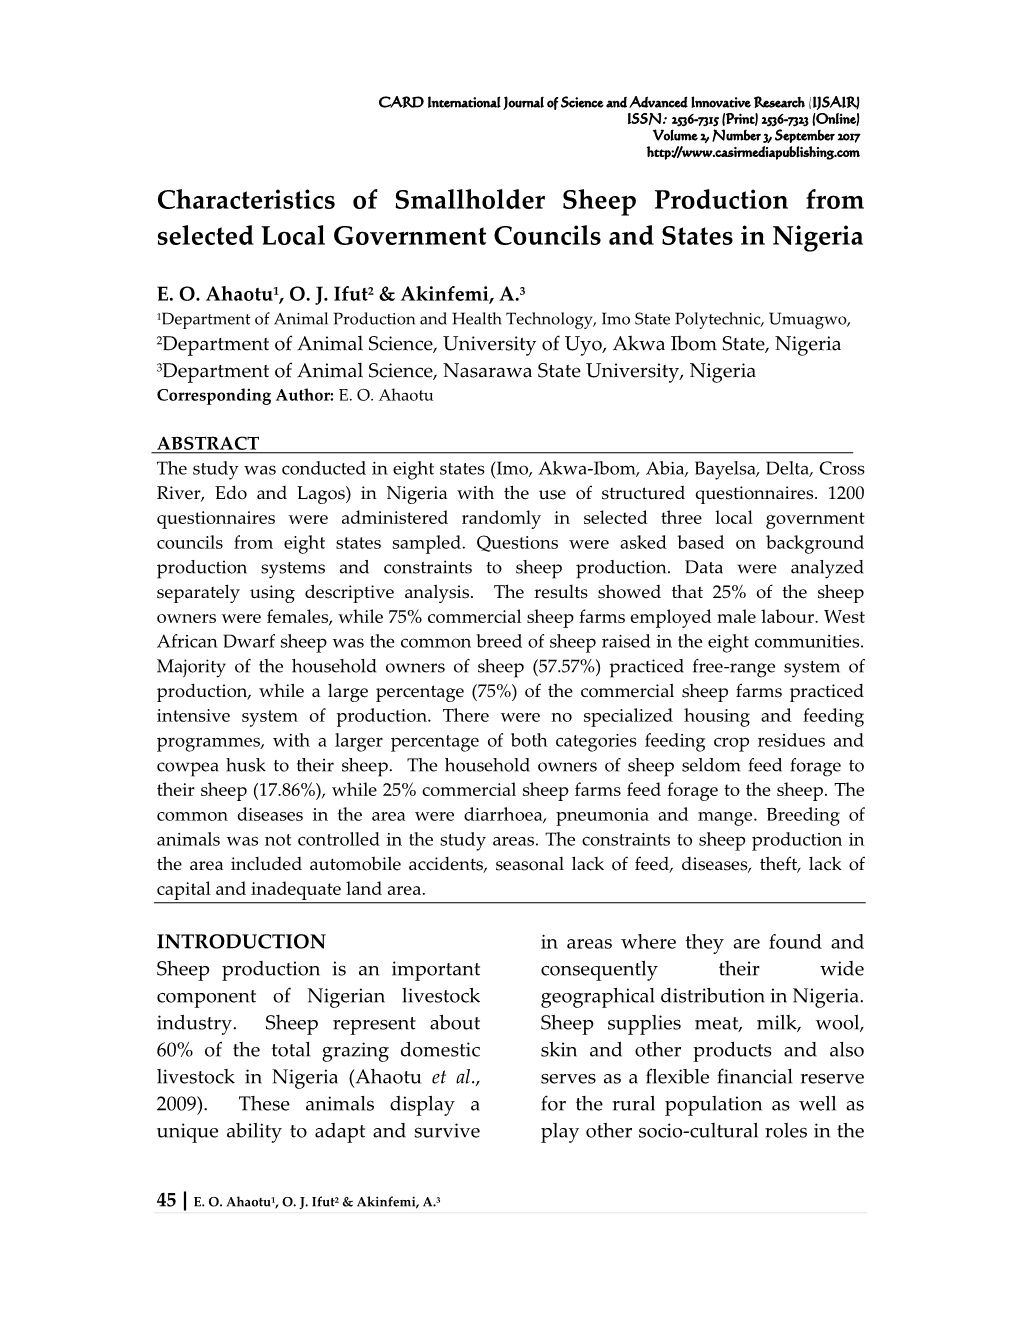 Characteristics of Smallholder Sheep Production from Selected Local Government Councils and States in Nigeria